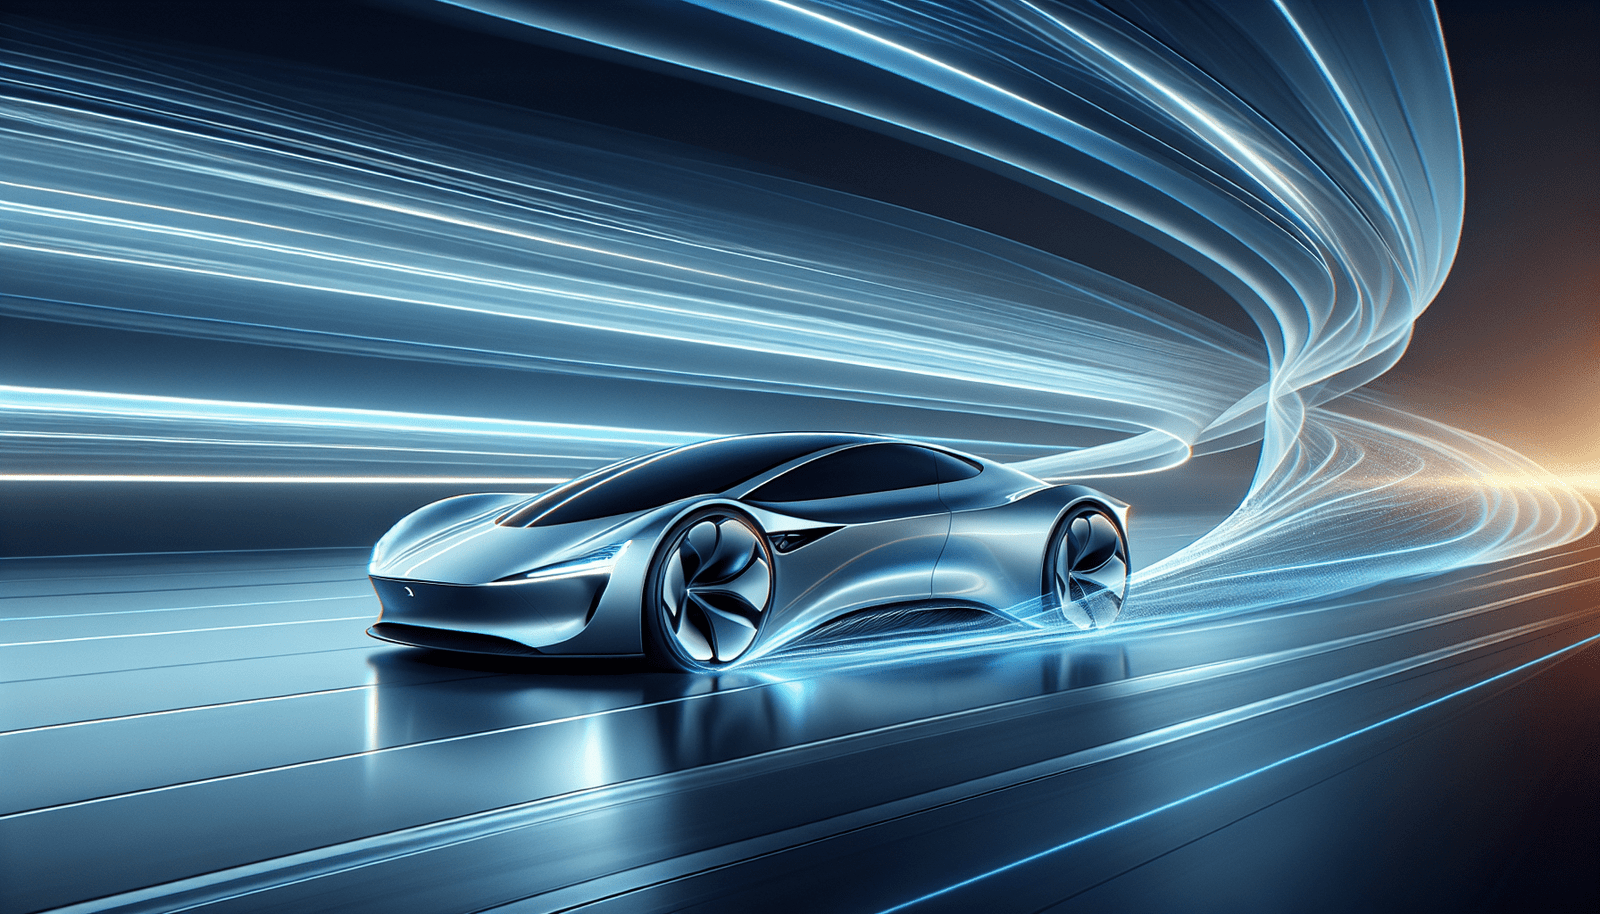 How Is Aerodynamics Being Optimized For Electric Car Efficiency?